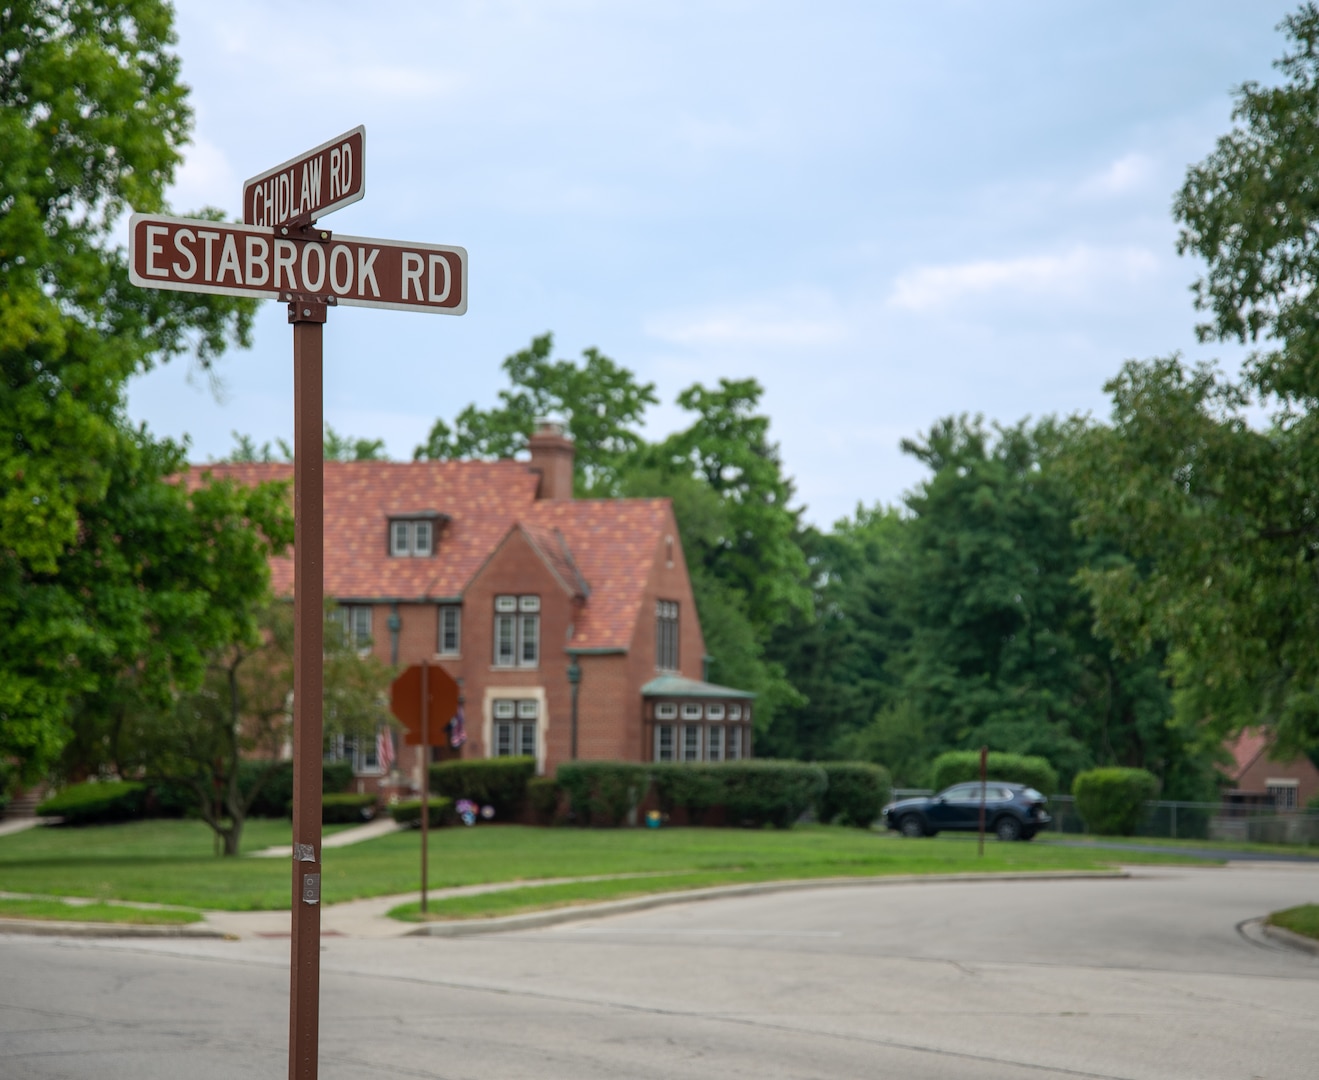 Estabrook Road on Area A, Wright-Patterson Air Force Base, Ohio, was named after Brig. Gen. Merrick Estabrook Jr., July 12, 2022. Estabrook was commander of both Patterson Field and Fairfield Air Depot from 1939 to 1943. The road runs from Wright-Patterson Medical Center to Turtle Pond.